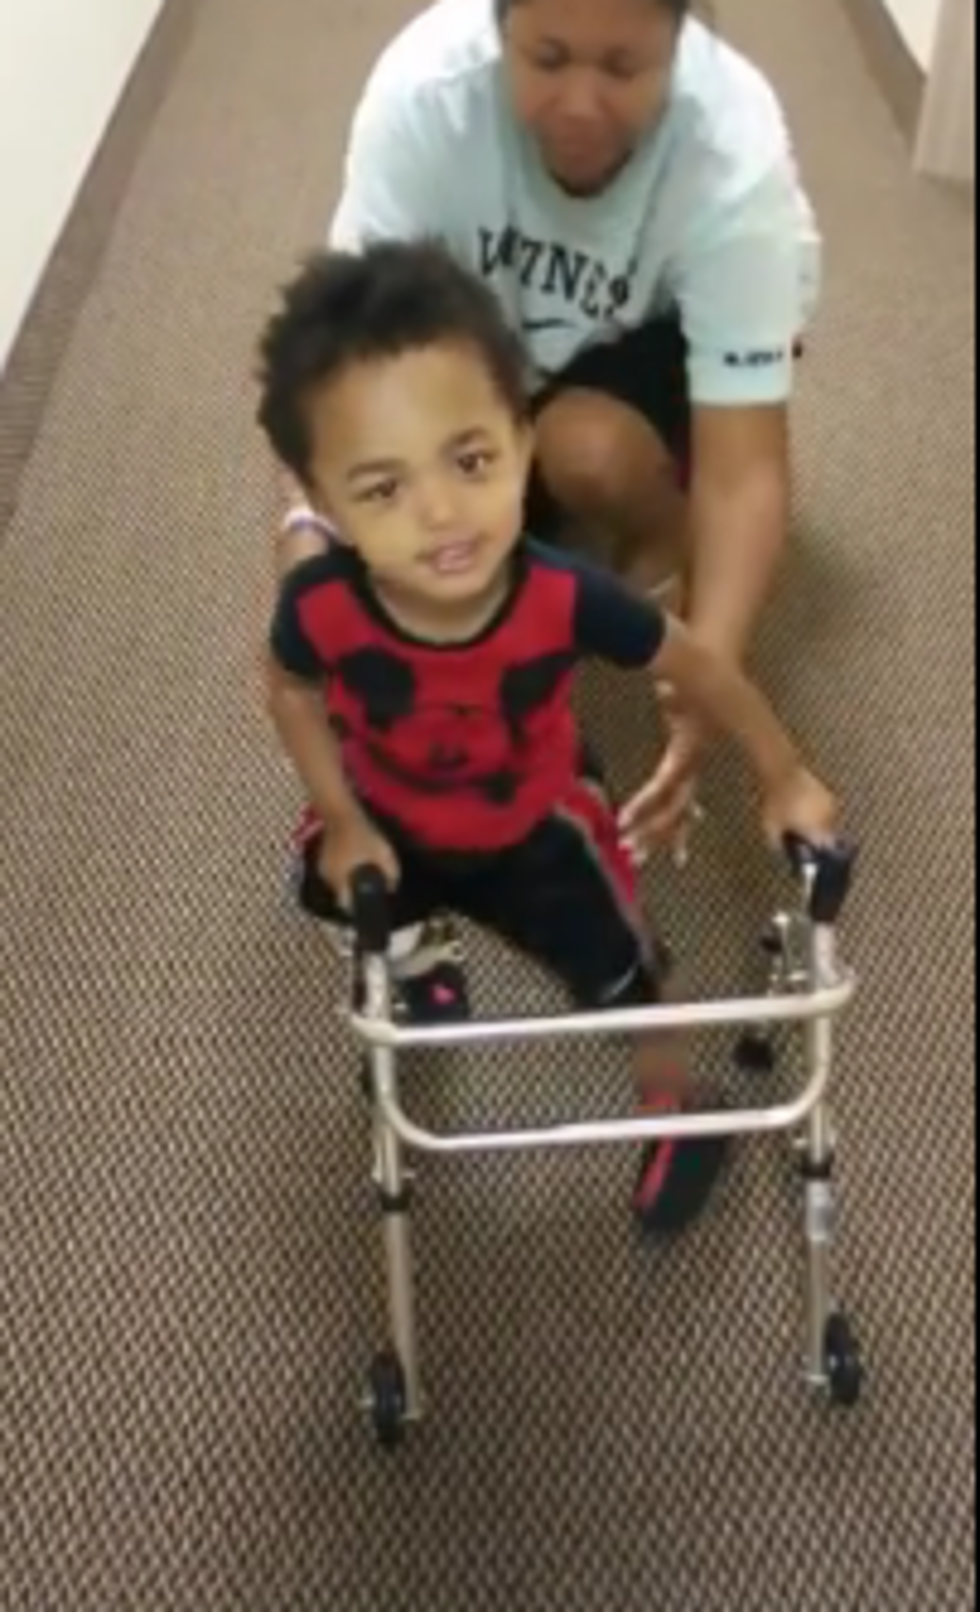 Toddler With Prosthetics Takes His First Steps While Saying “I Got This” [Video]